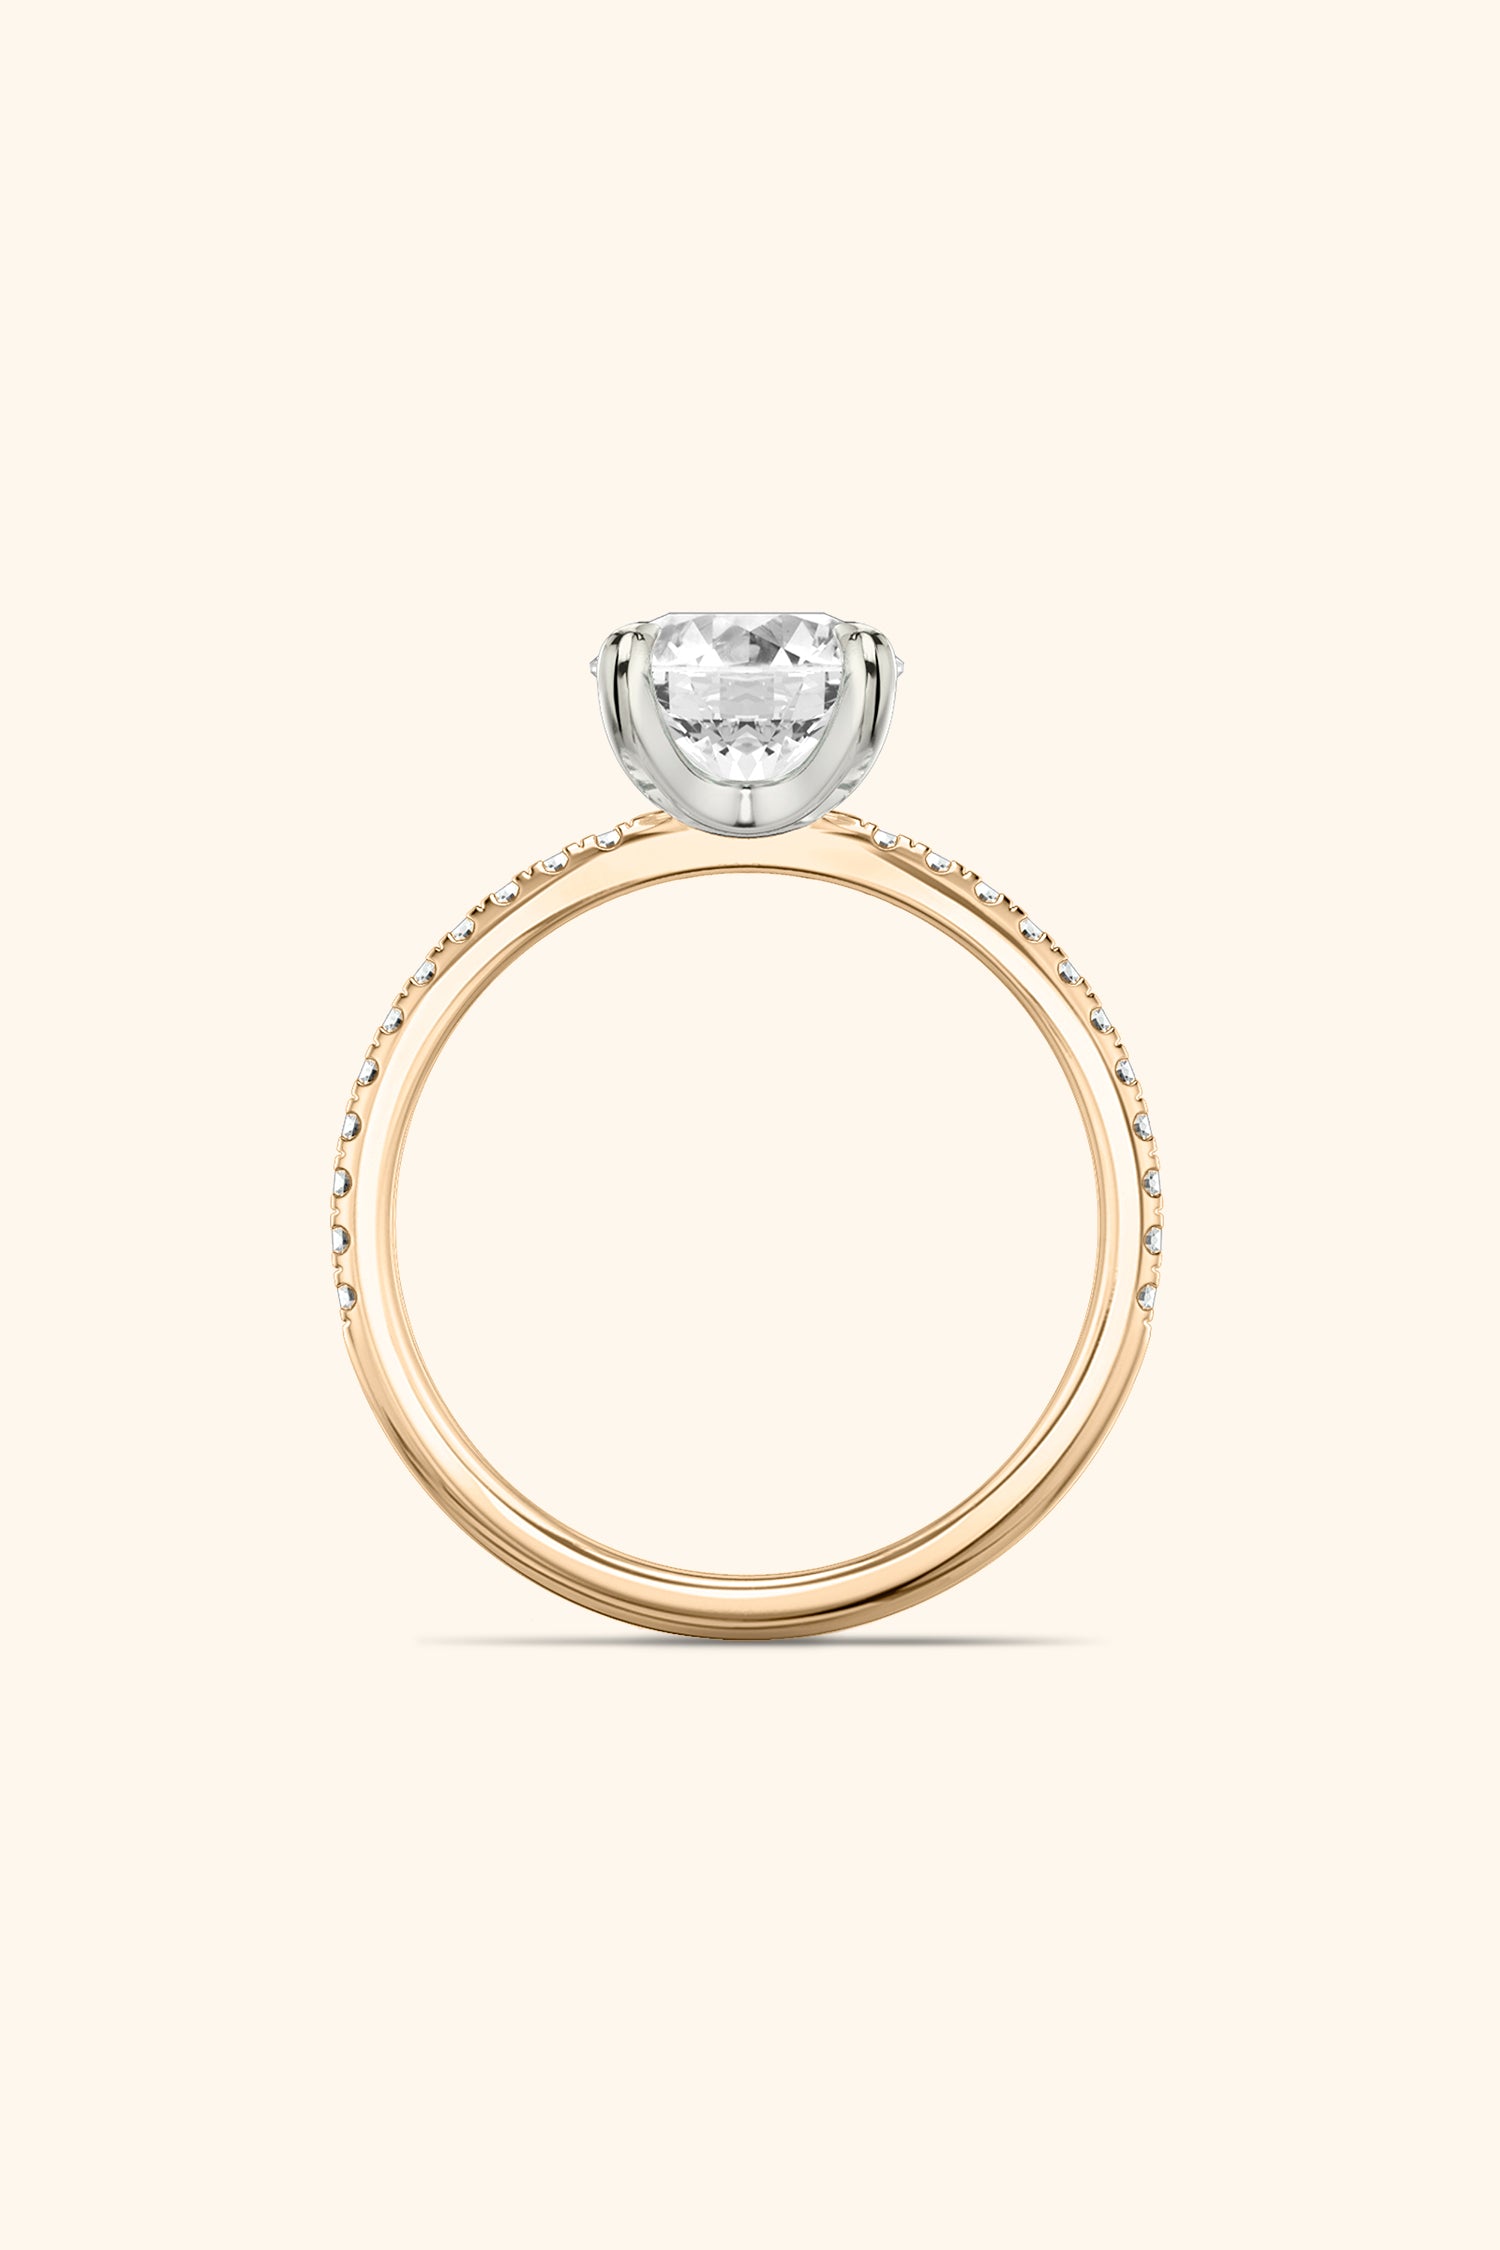 Dual Tone Glance Pave Ring with 3 Carat Round Brilliant Solitaire